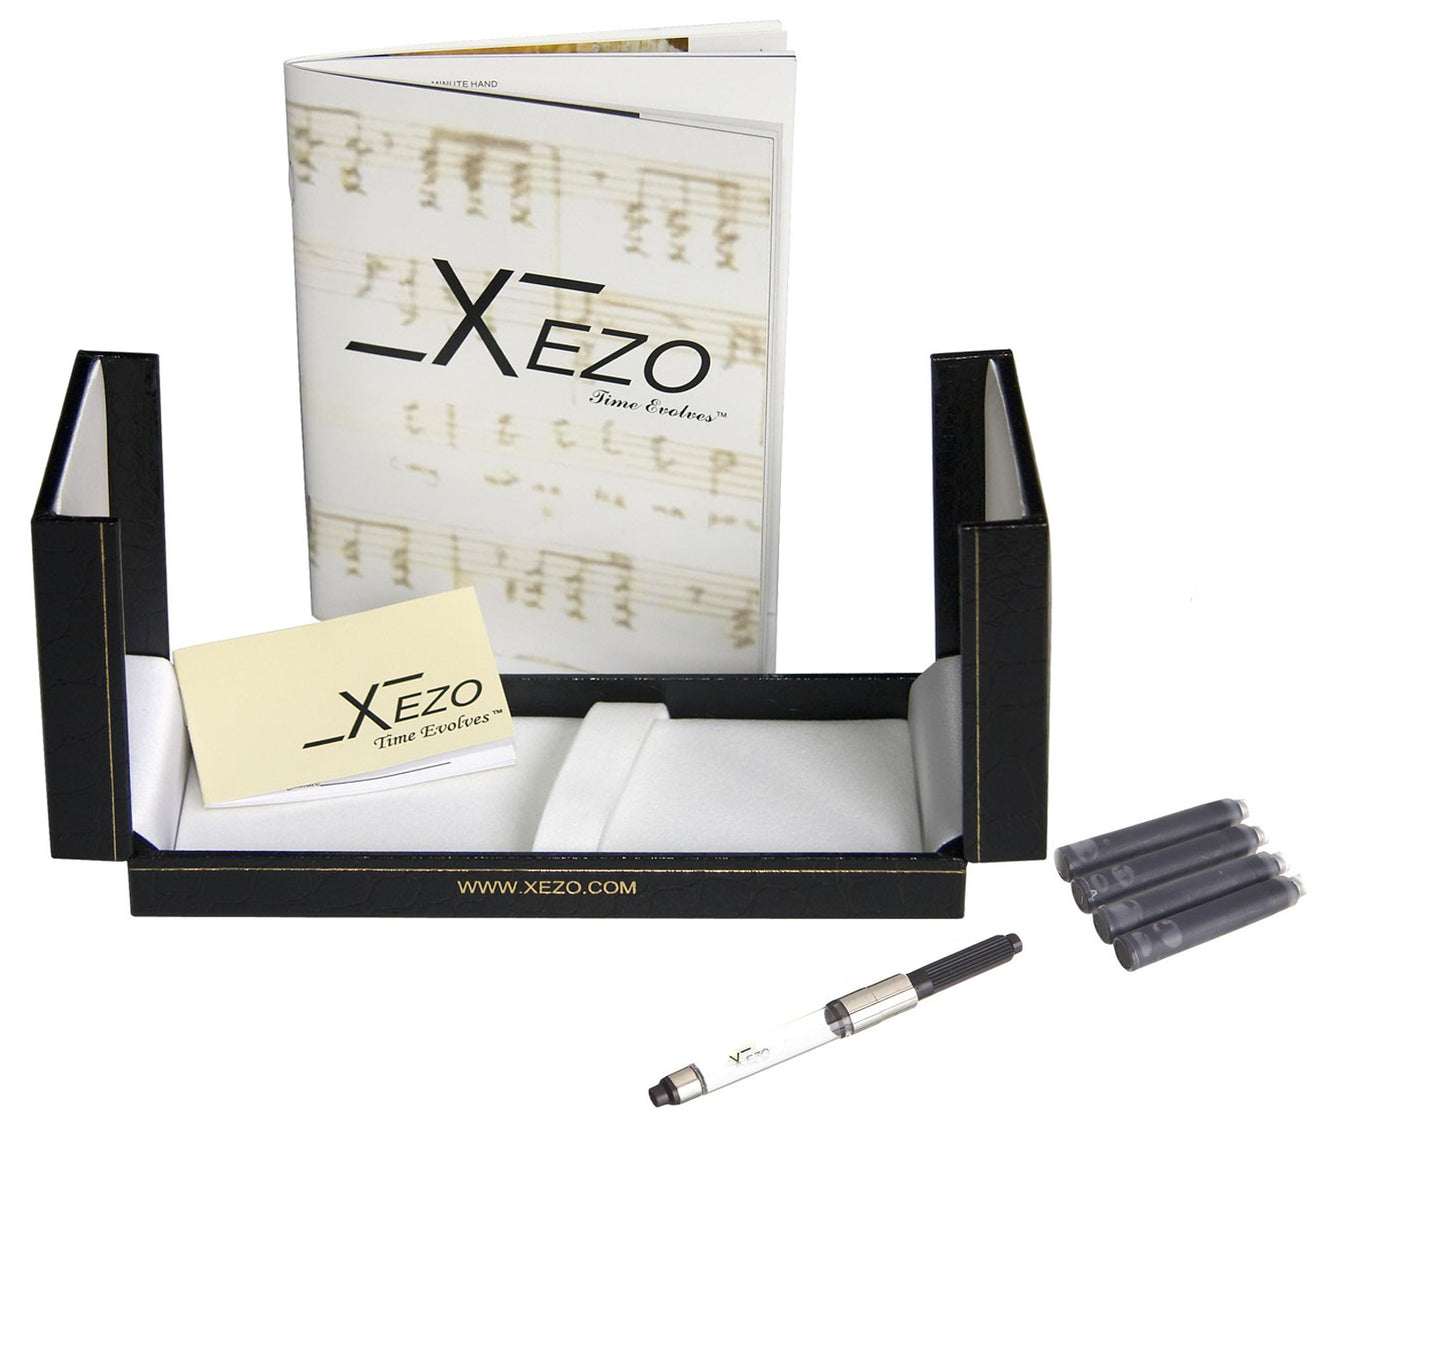 Xezo - Black gift box, certificate, manual, chrome-plated ink converter, and four ink cartridges of the Phantom Classic Black F fountain pen